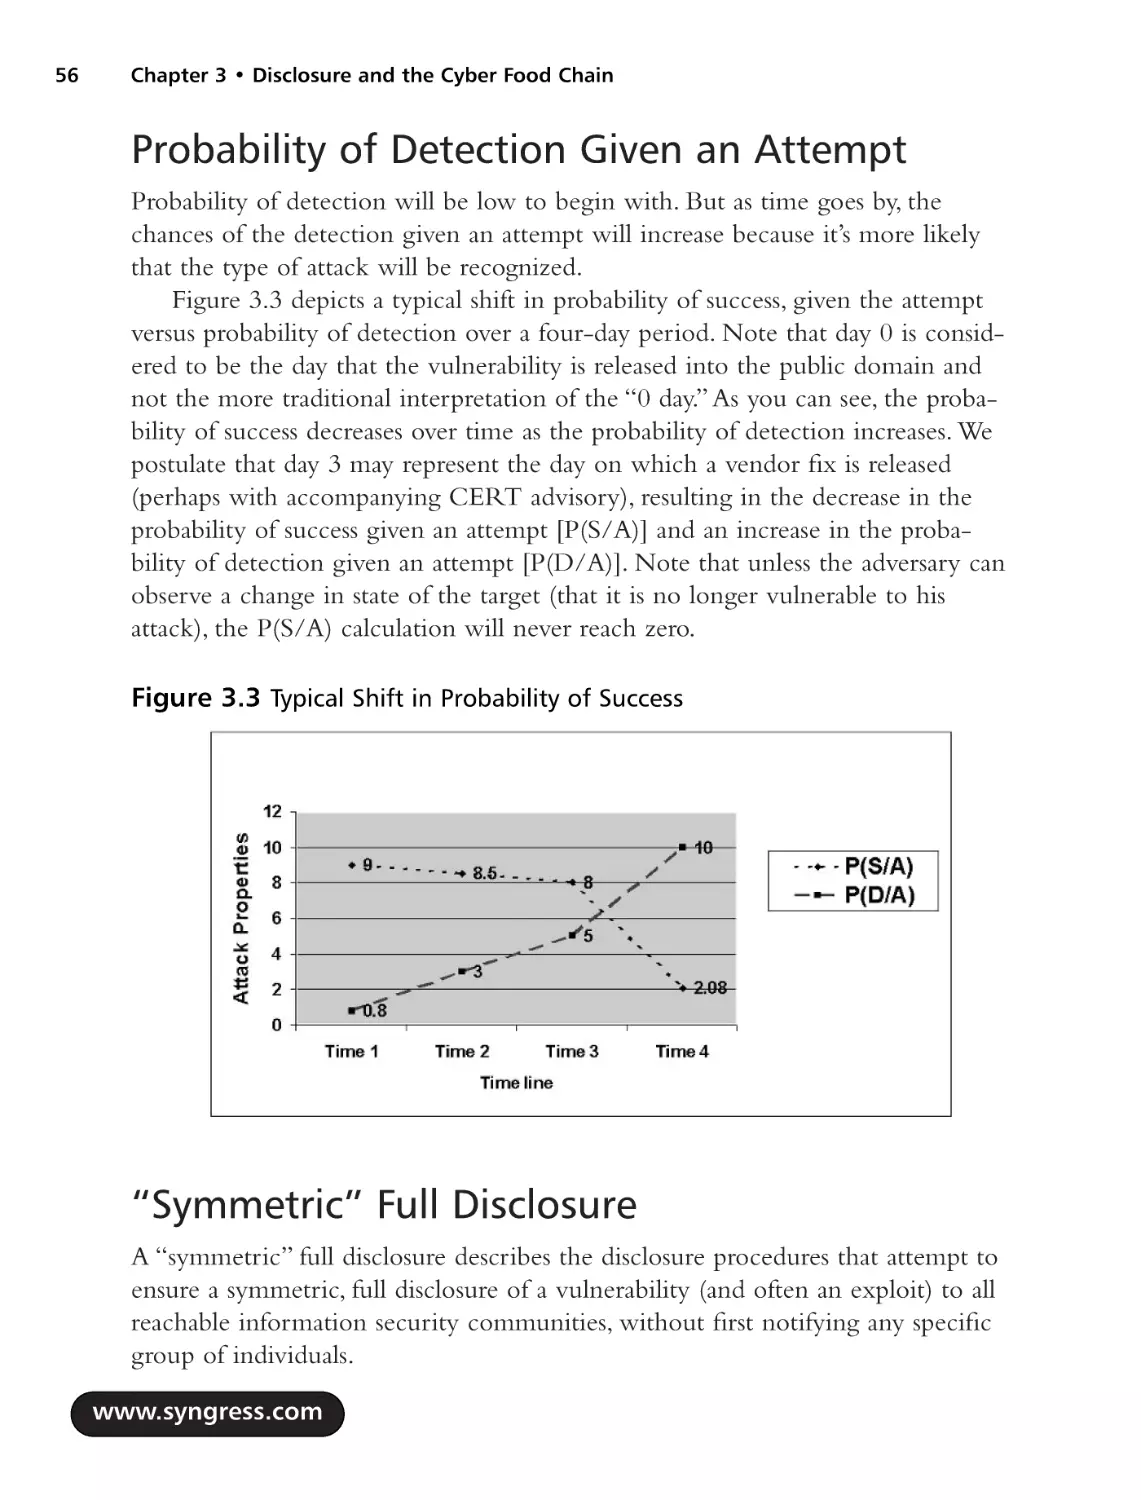 Probability of Detection Given an Attempt
"Symmetric" Full Disclosure